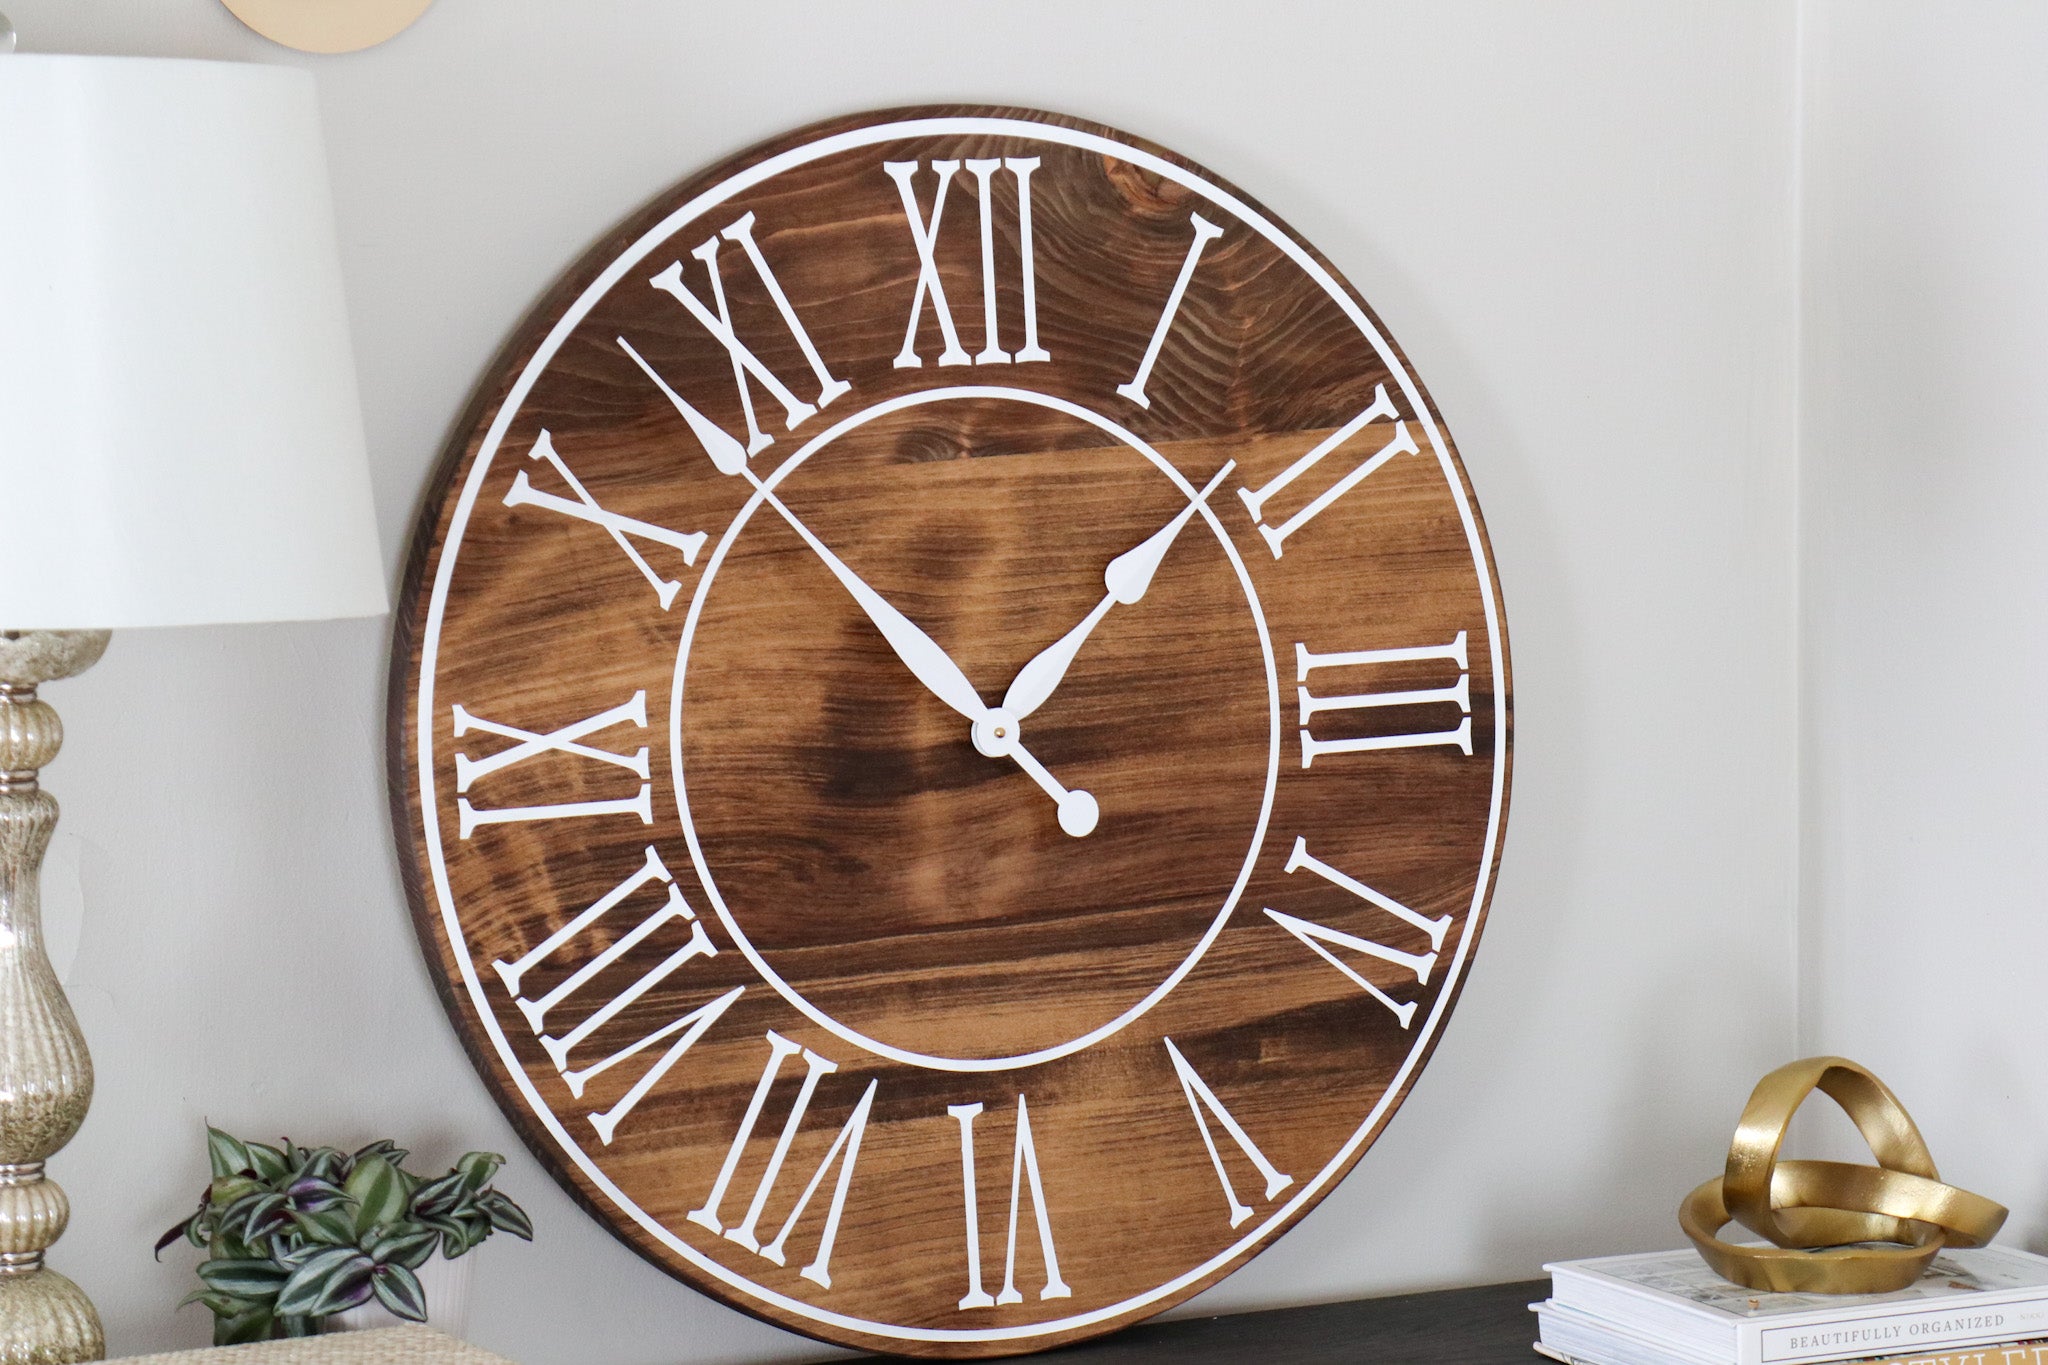 Light Stained Large Farmhouse Wall Clock with White Roman Numerals &amp; Lines